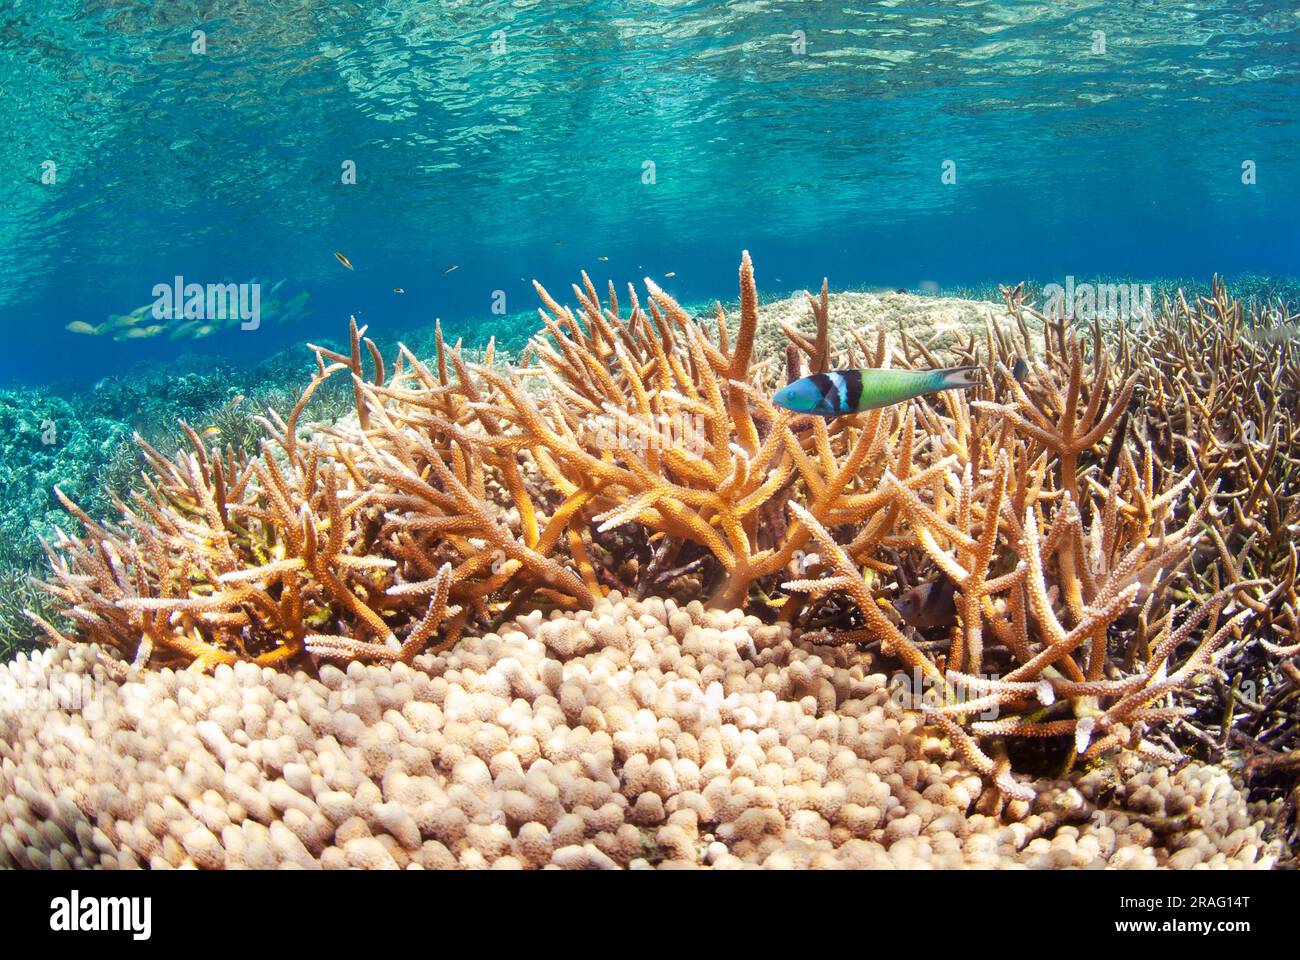 Yellowhead wrasse swimming over Staghorn coral (Acropora cervicornis) Stock Photo